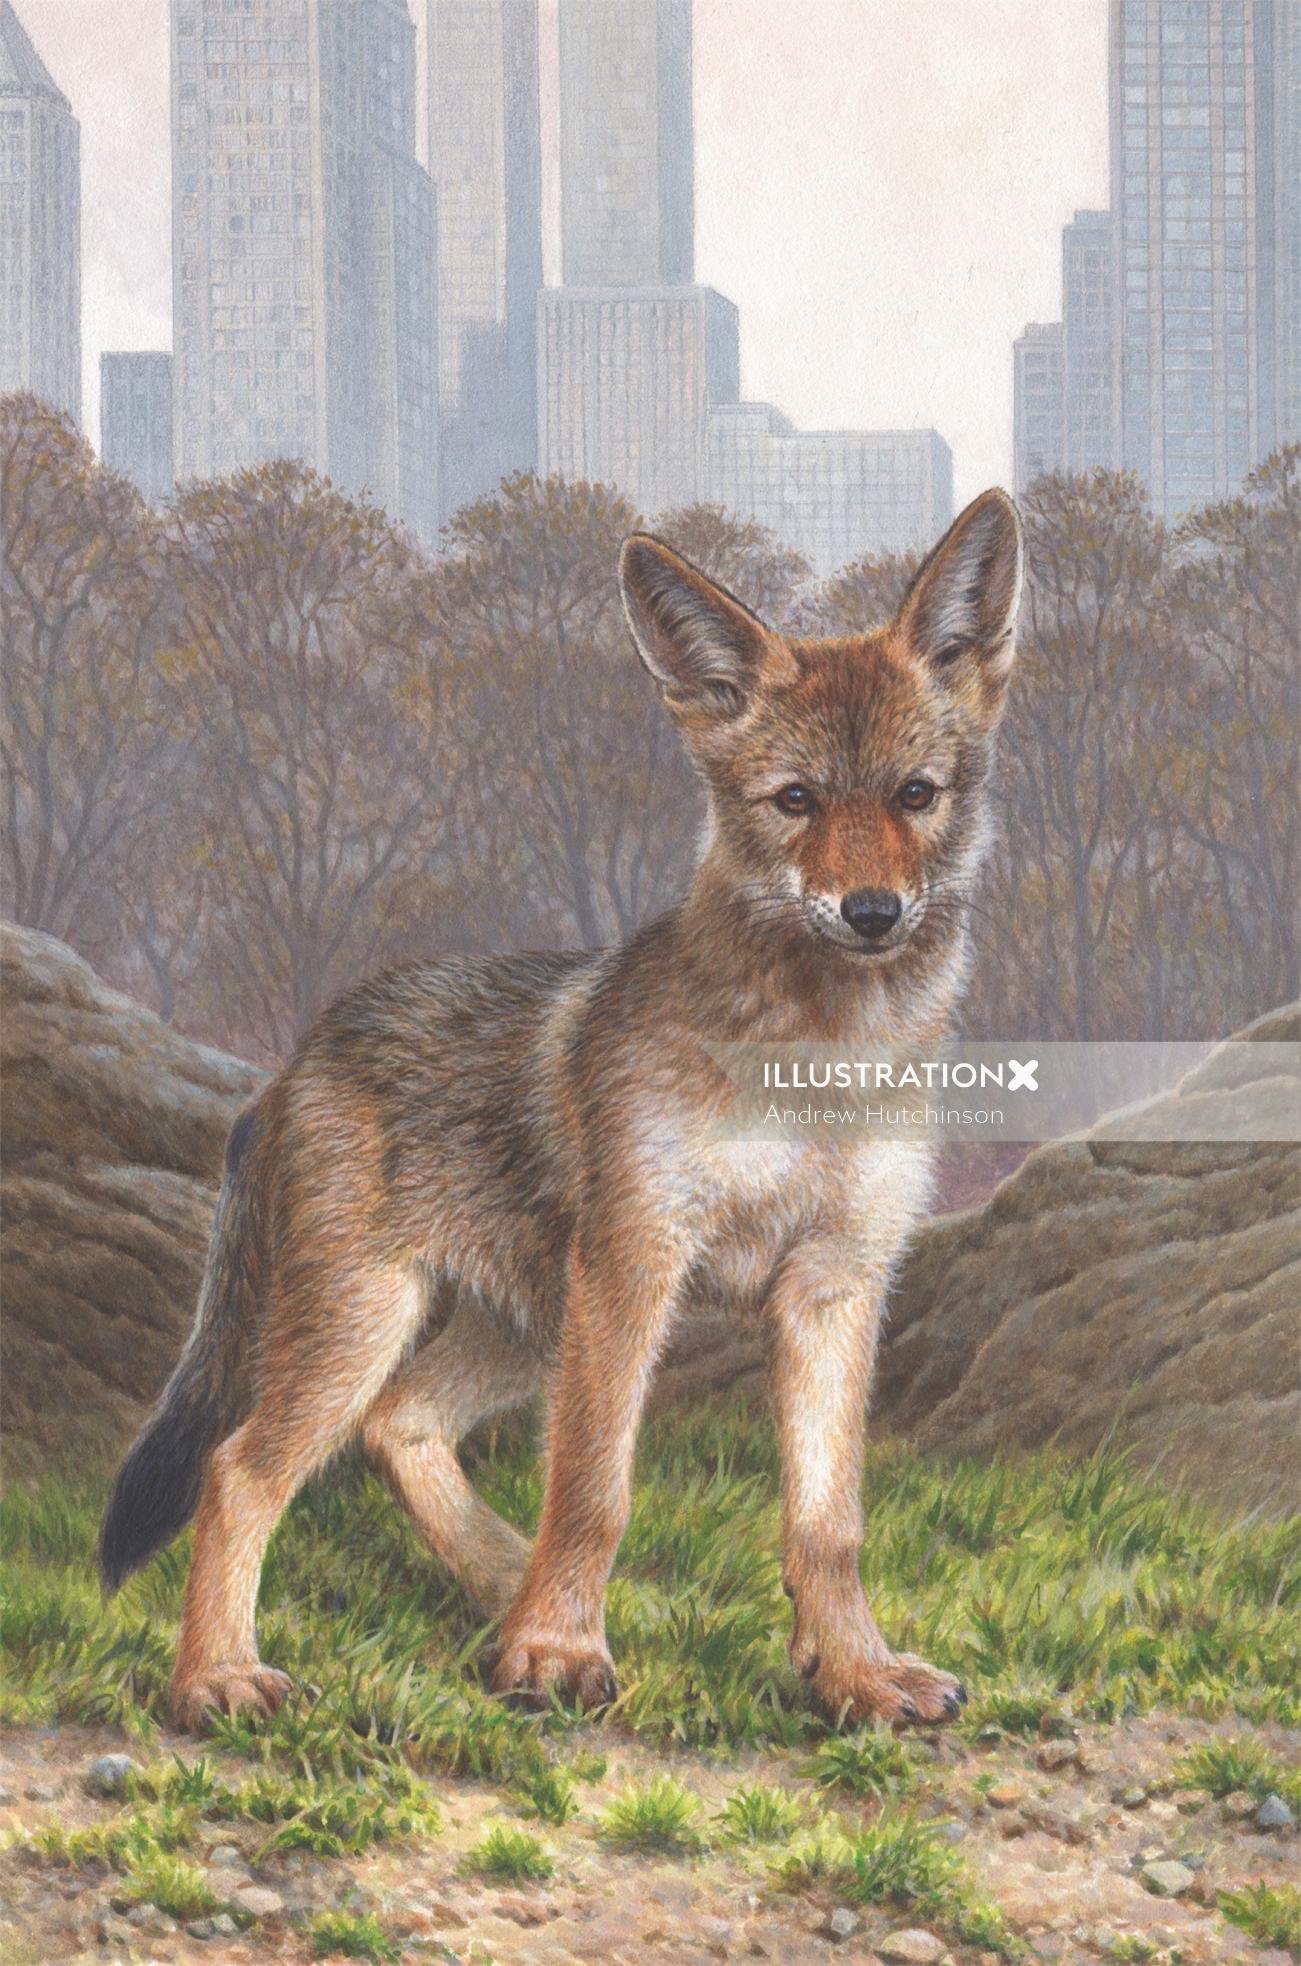 Cover art for "A Pup Called Trouble" features a Young Eastern Coyote